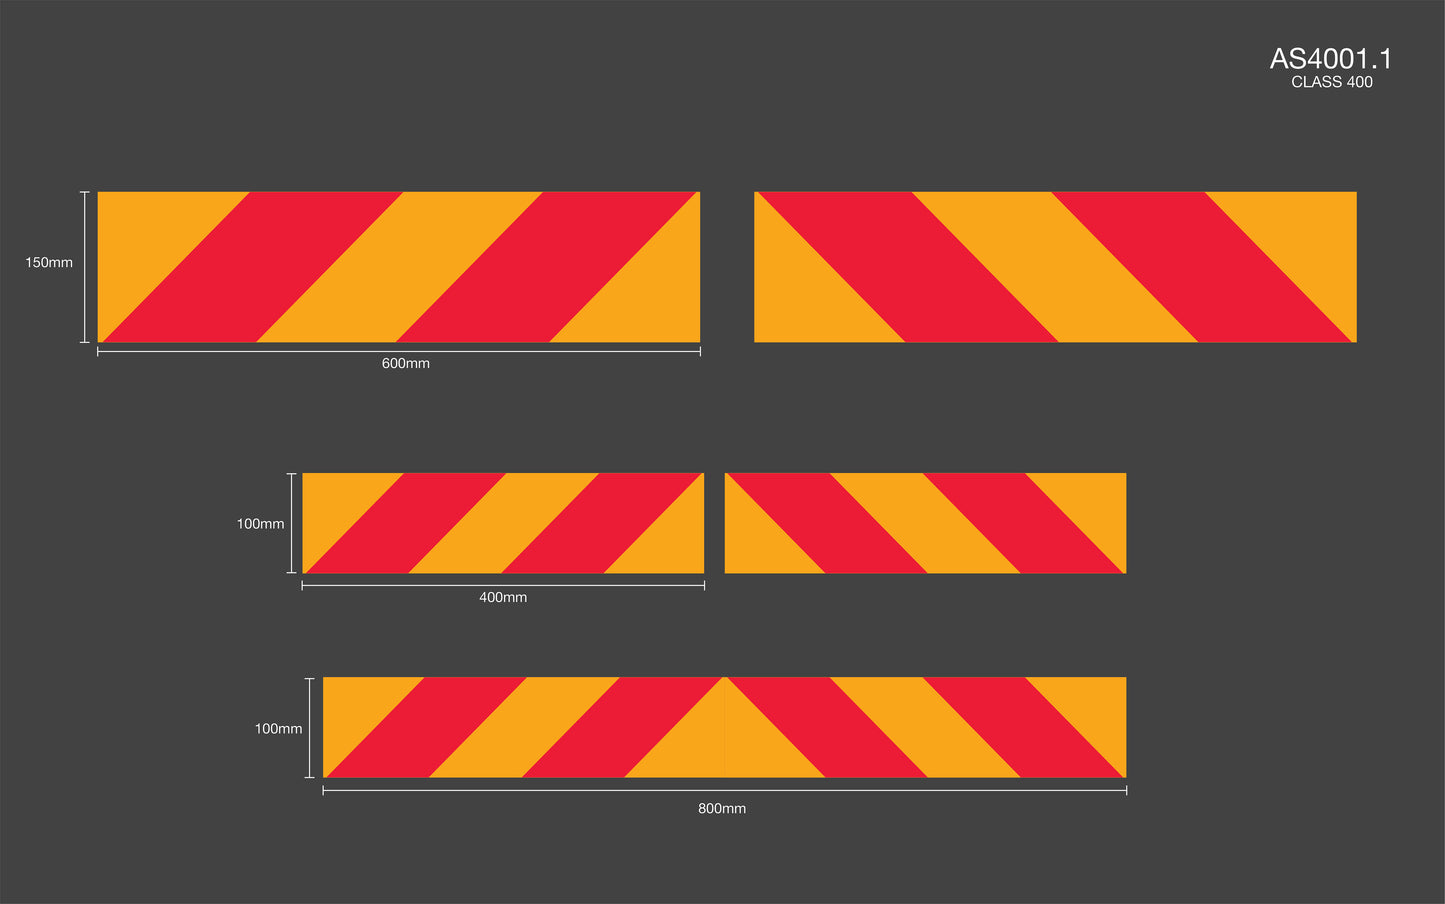 Vehicle Rear Marker Red Yellow Candy Plates (LHS) 400mm x 100mm Reflective Sign